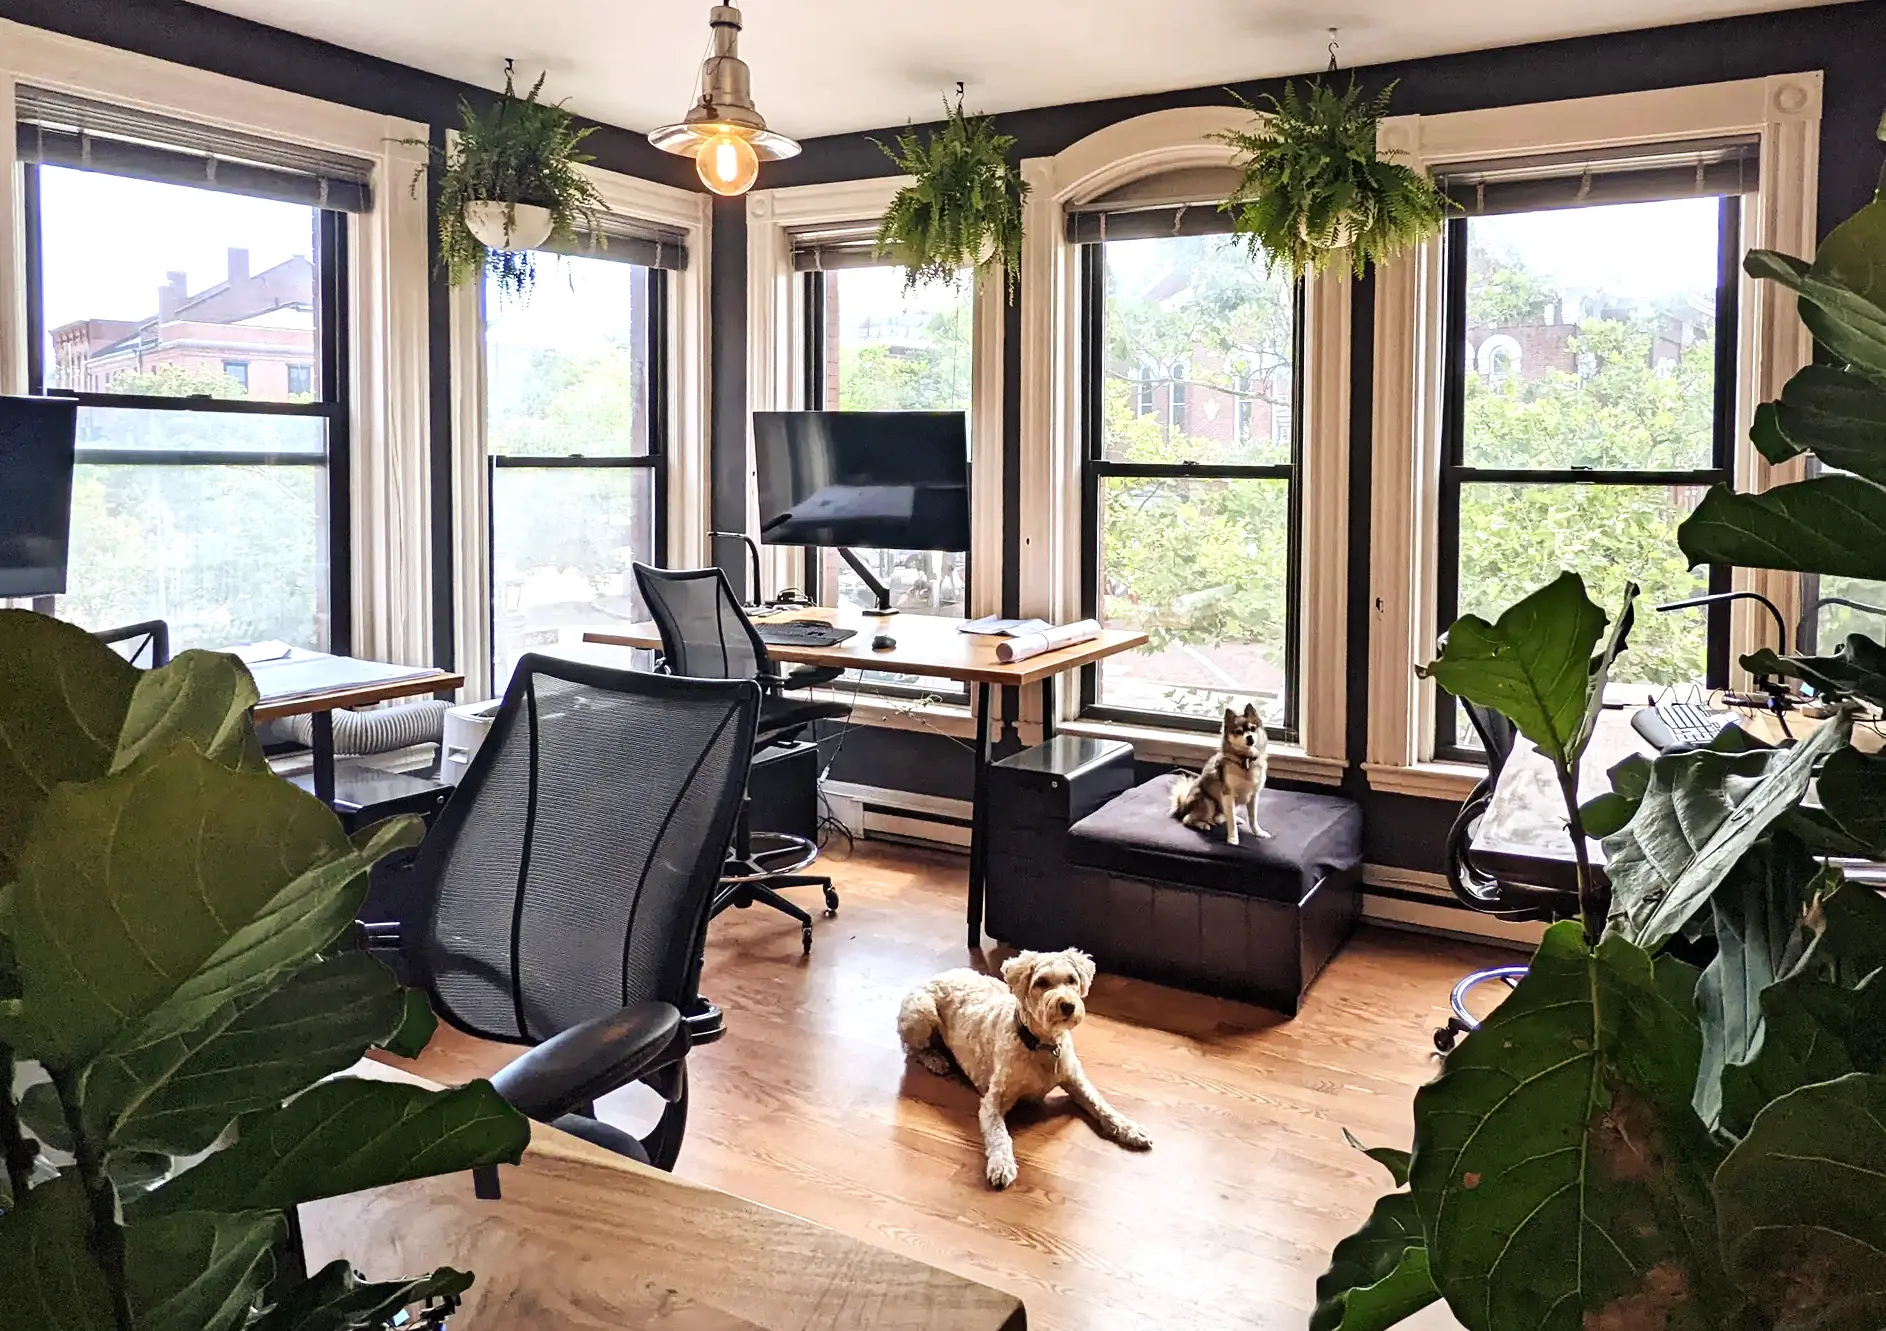 Interior view of ARCove Architecture's office located in a historic building in downtown Portsmouth, NH